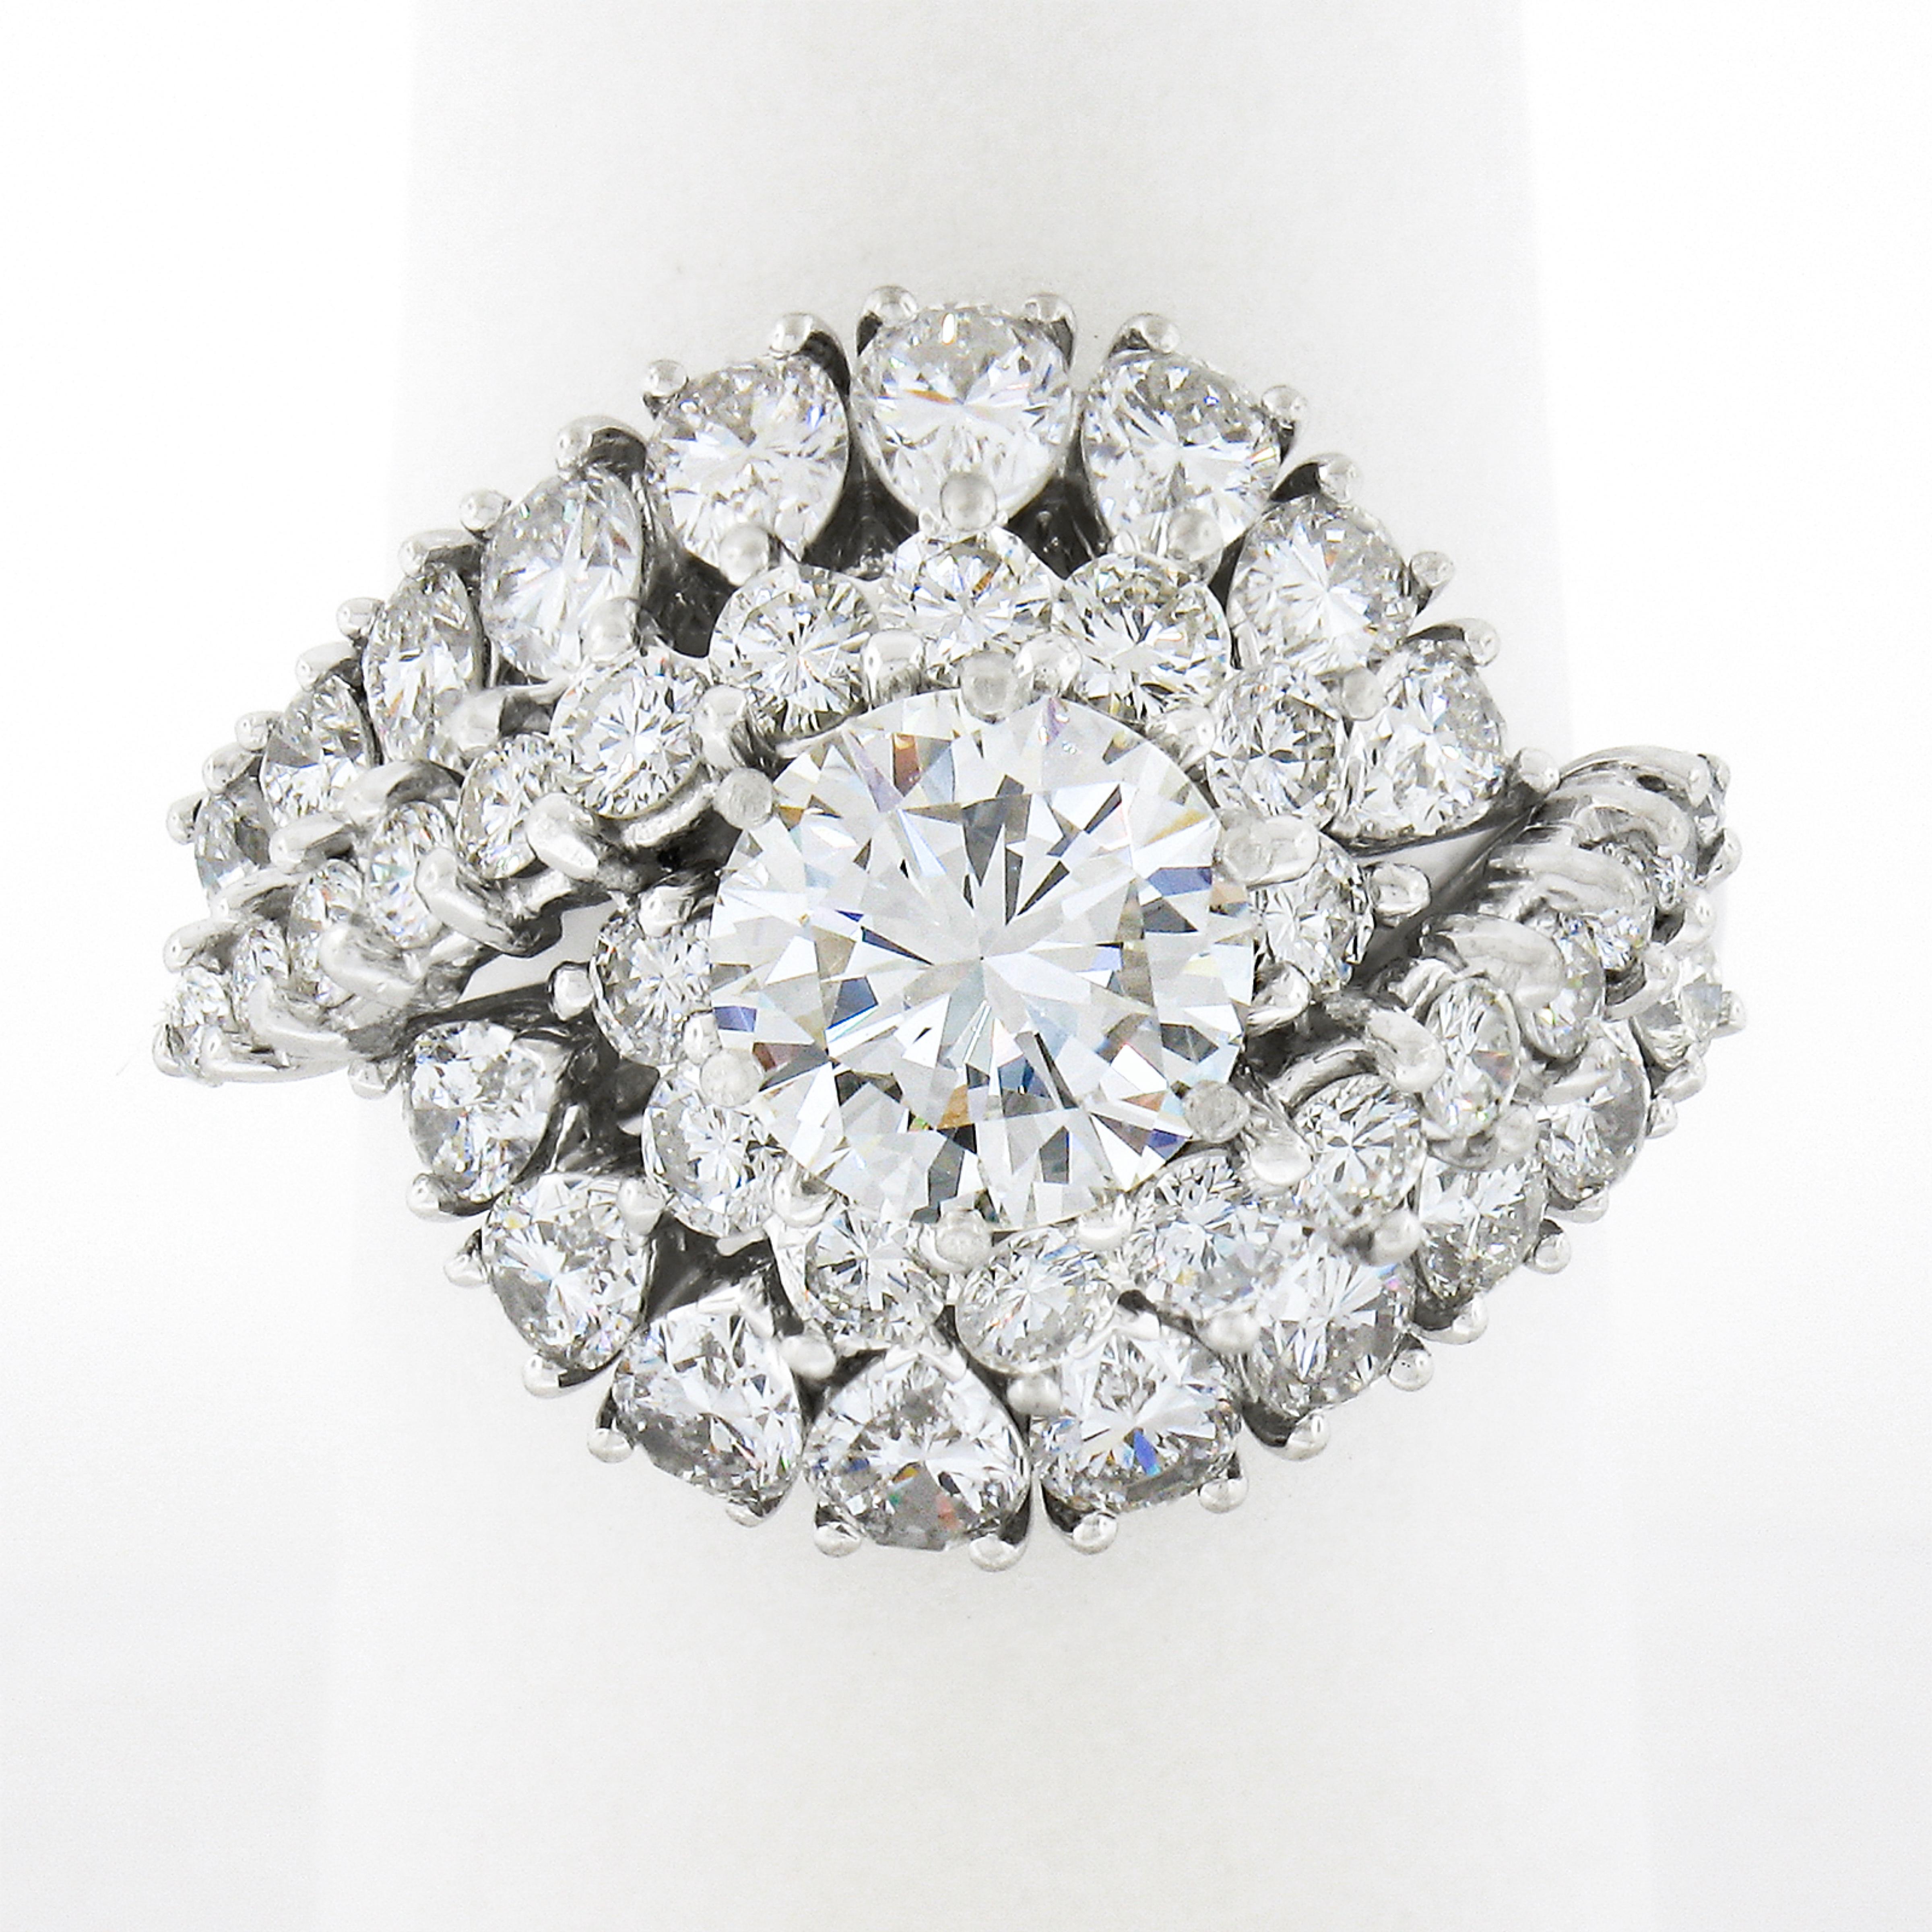 This truly jaw dropping engagement or cocktail diamond ring is very well crafted in solid platinum and is completely drenched in very fine quality diamonds throughout this incredible, domed, swirl design. It features a gorgeous, GIA certified,